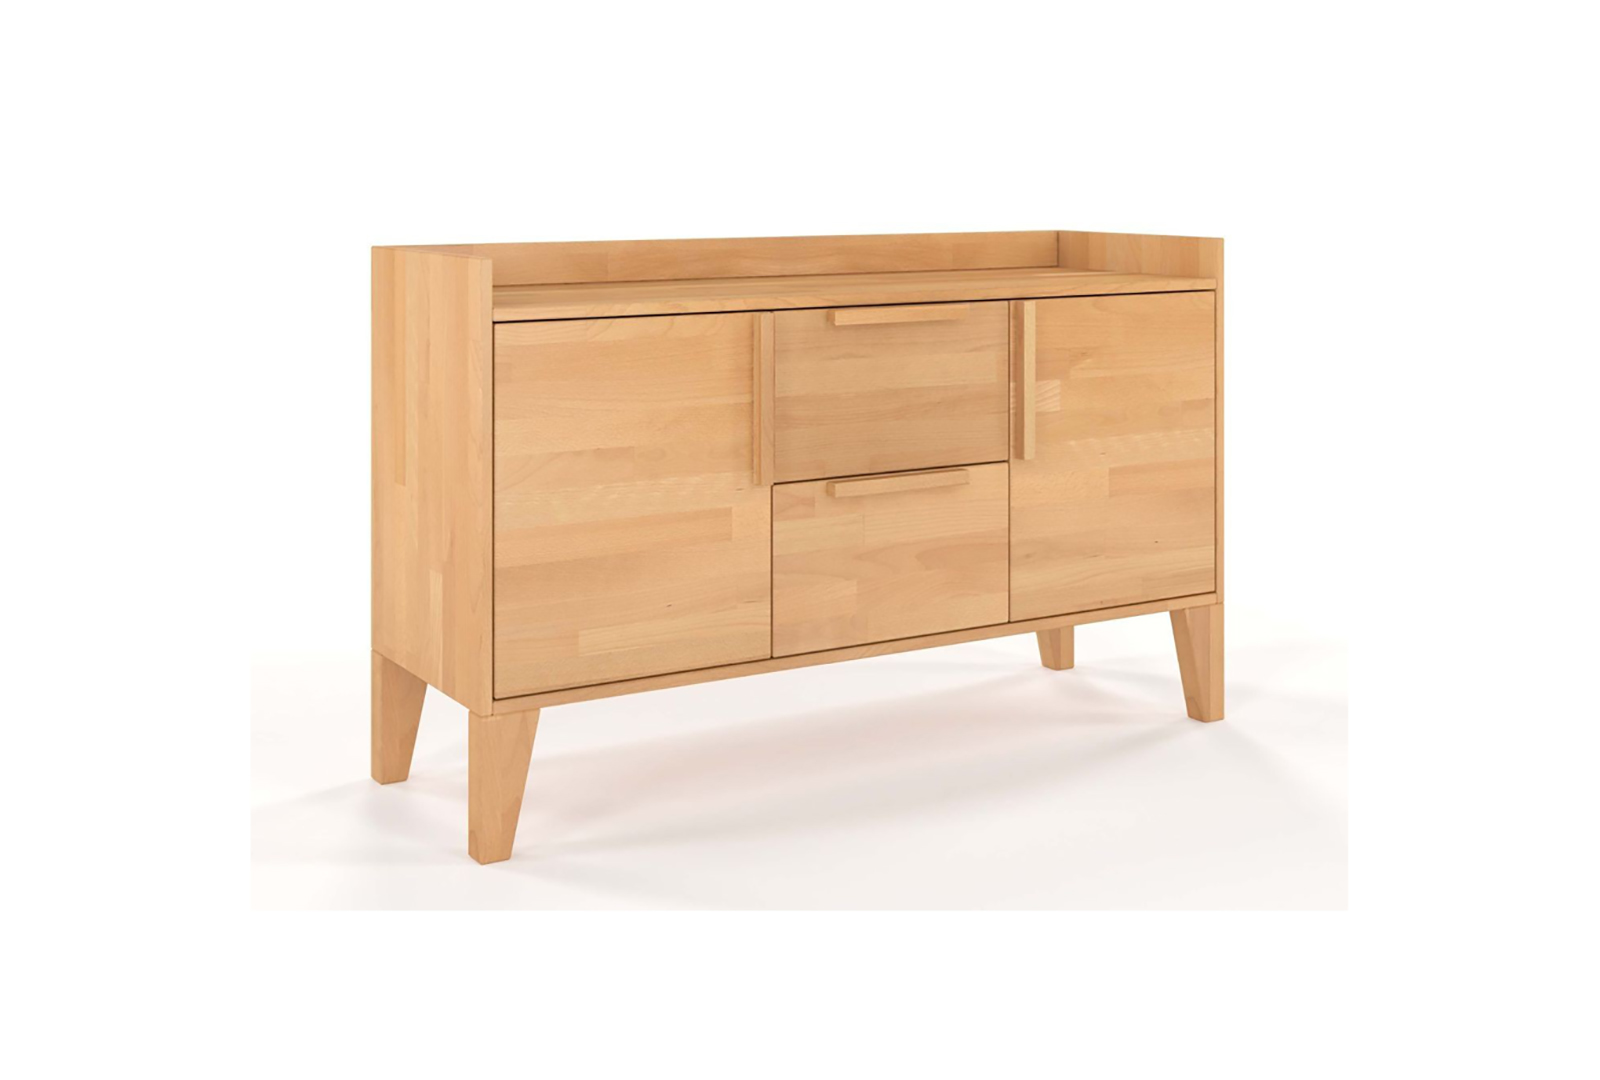 A WOODEN BEECH CHEST OF DRAWERS SKANDICA AGAVA